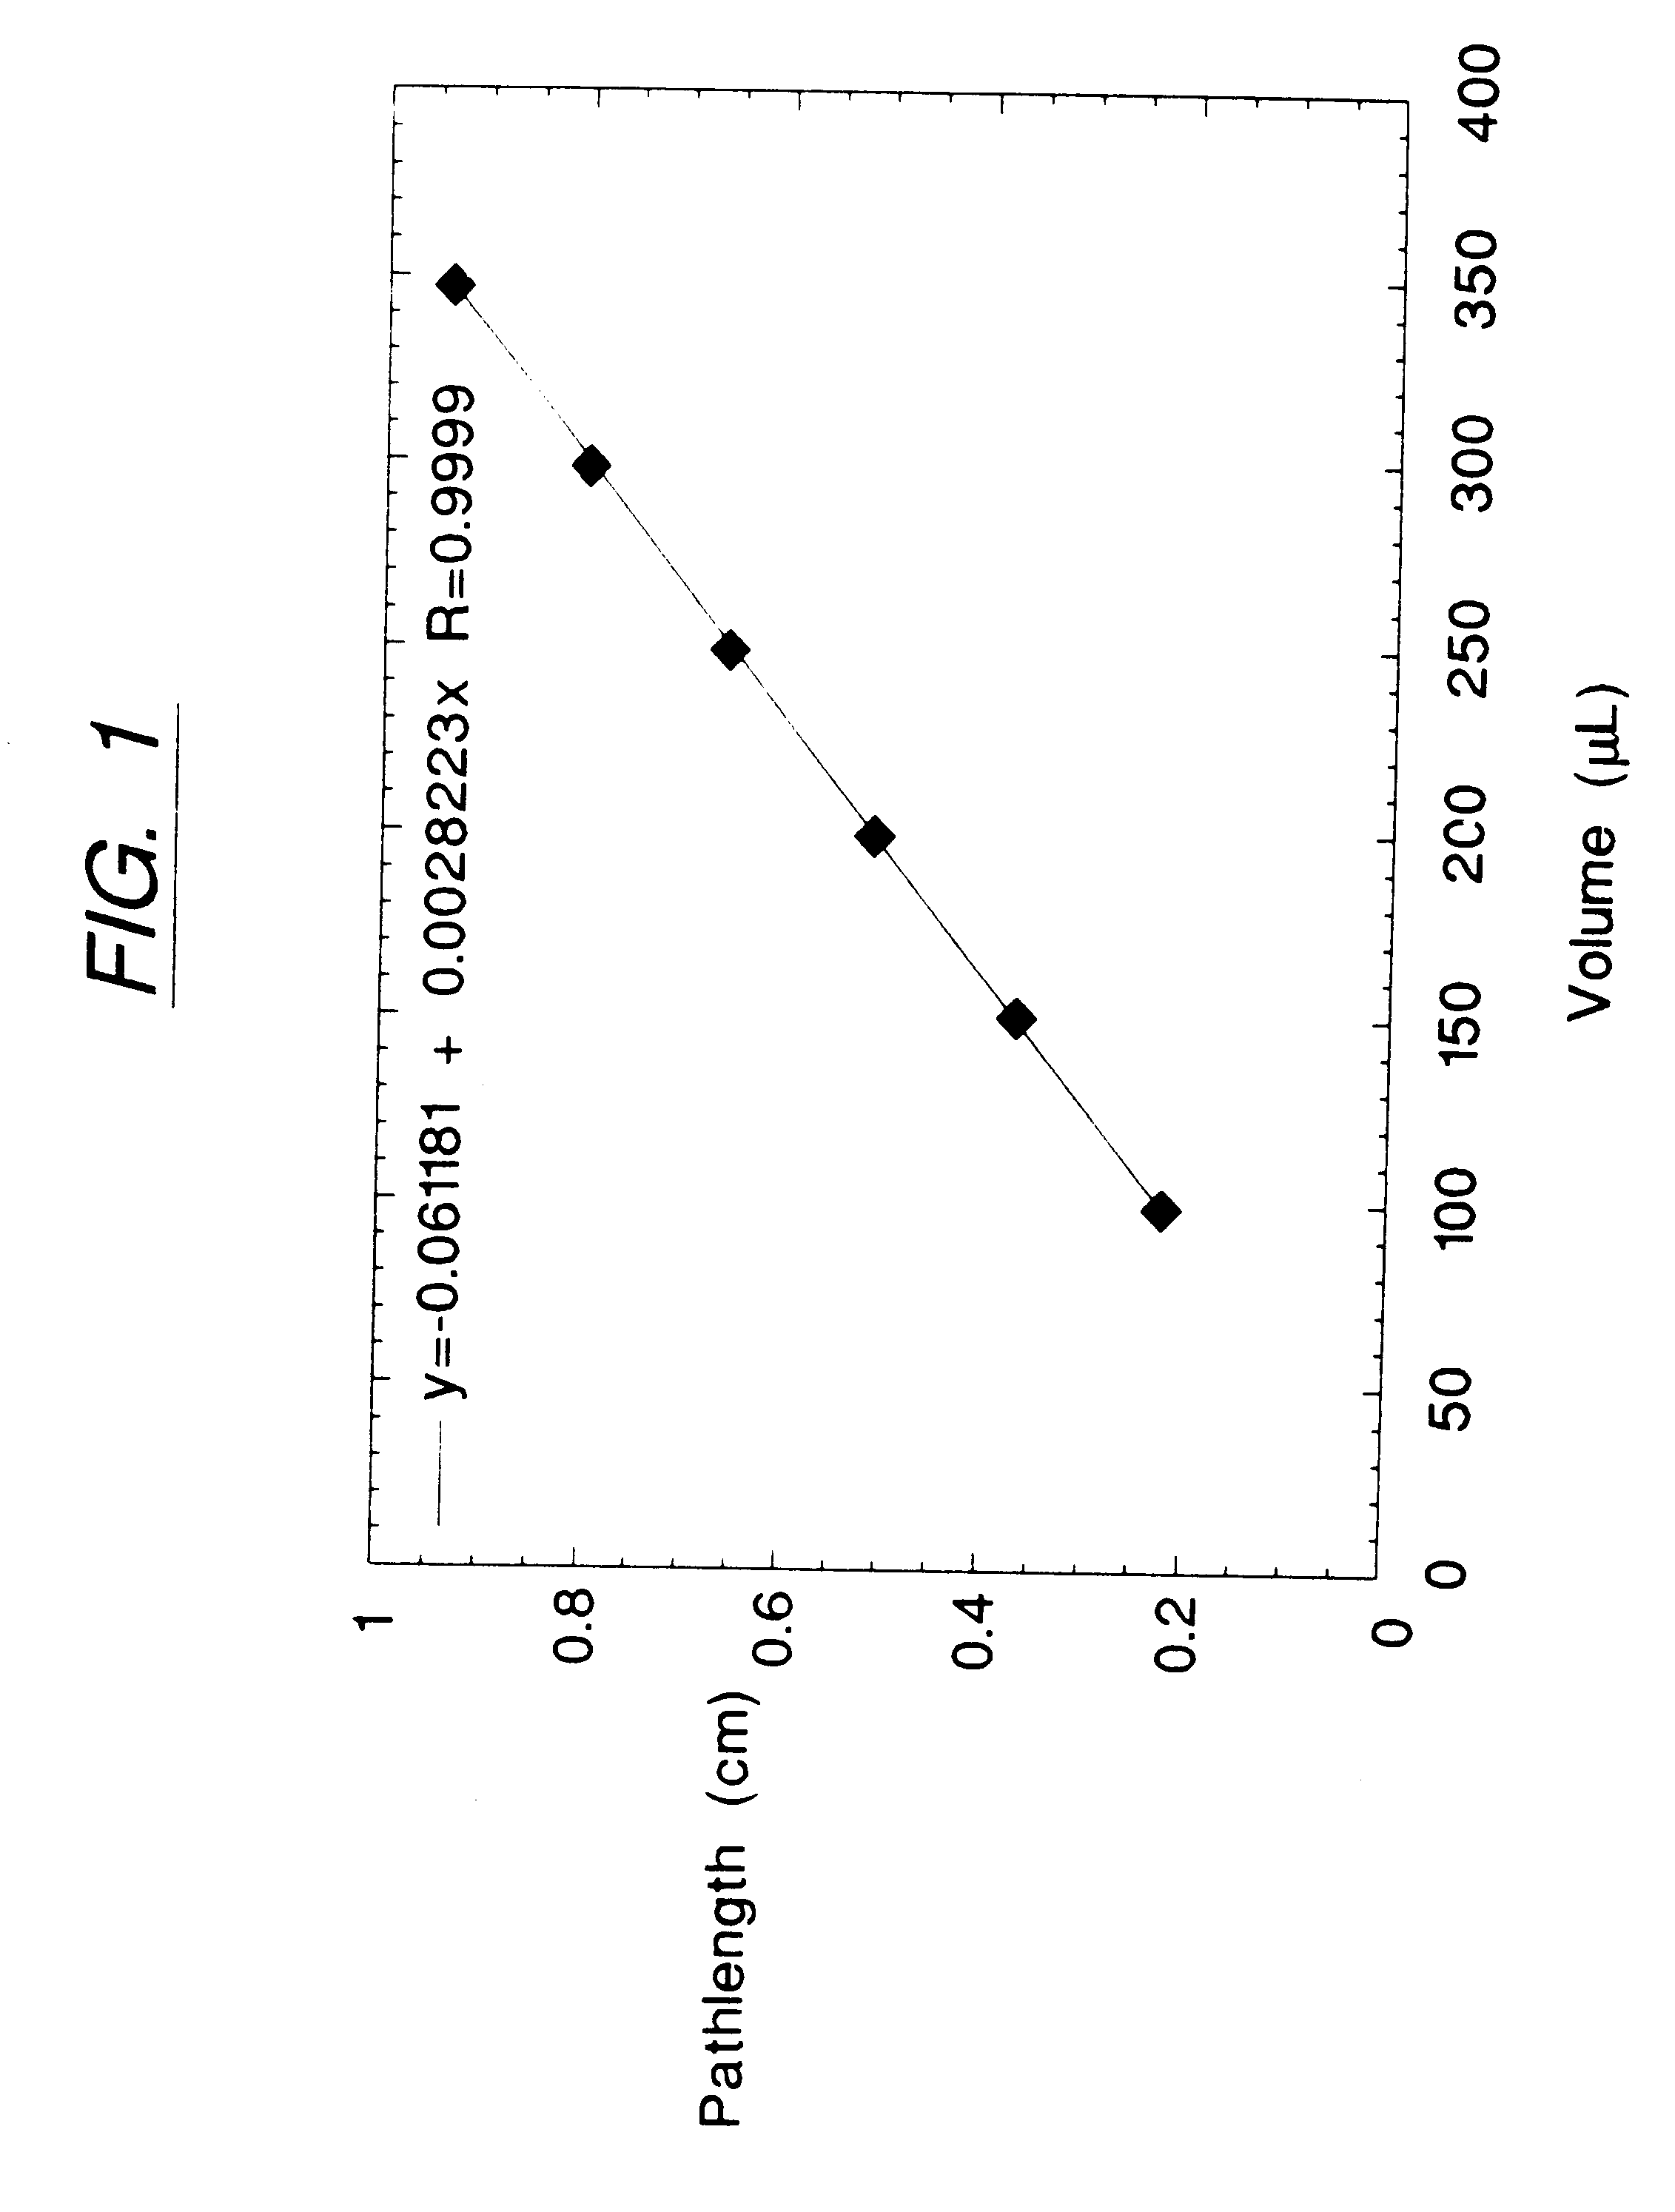 Determination of light absorption pathlength in a vertical-beam photometer